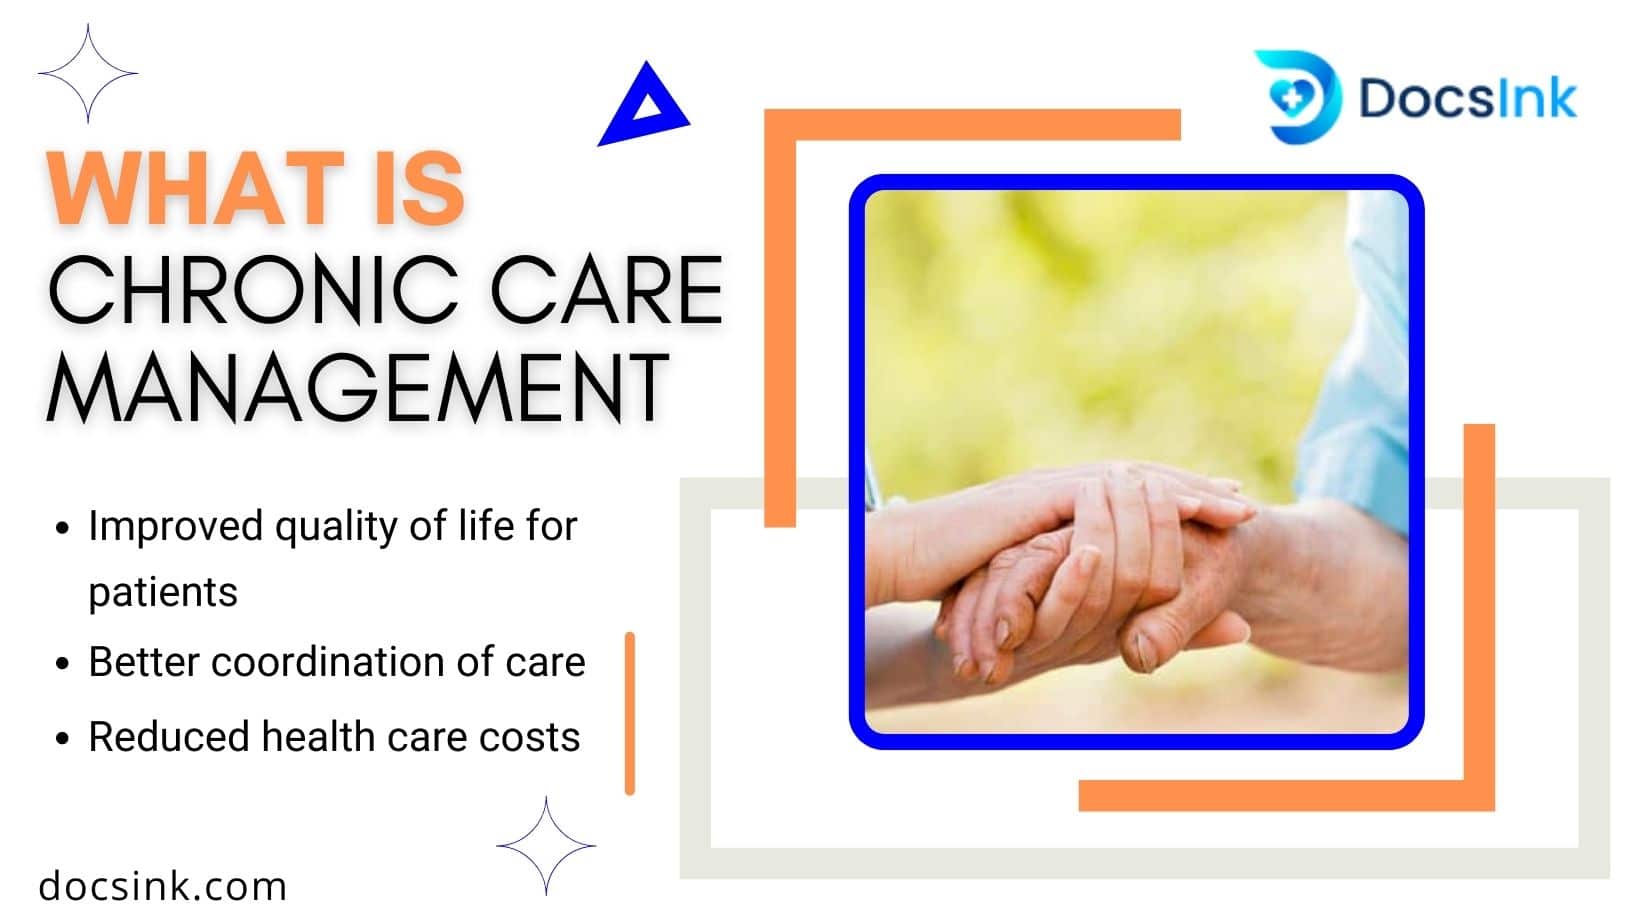 What is chronic care management